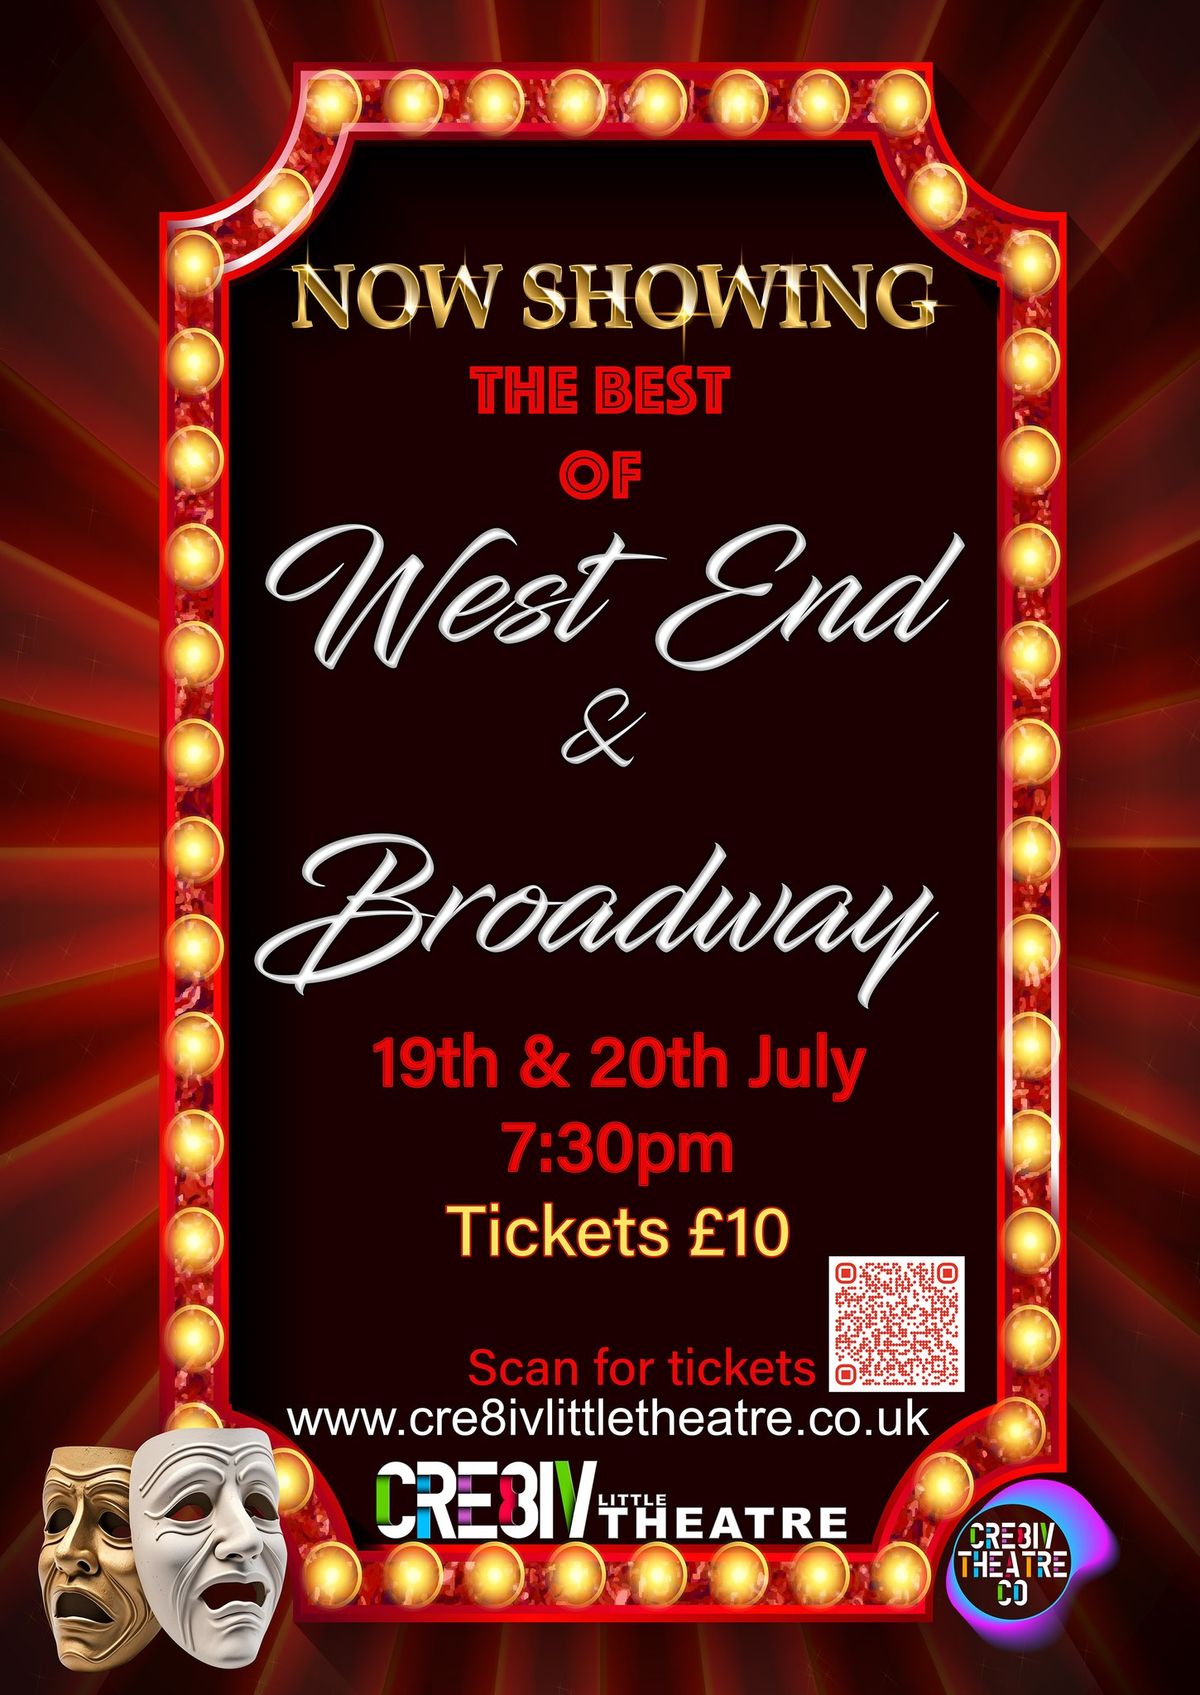 The Best Of West End & Broadway